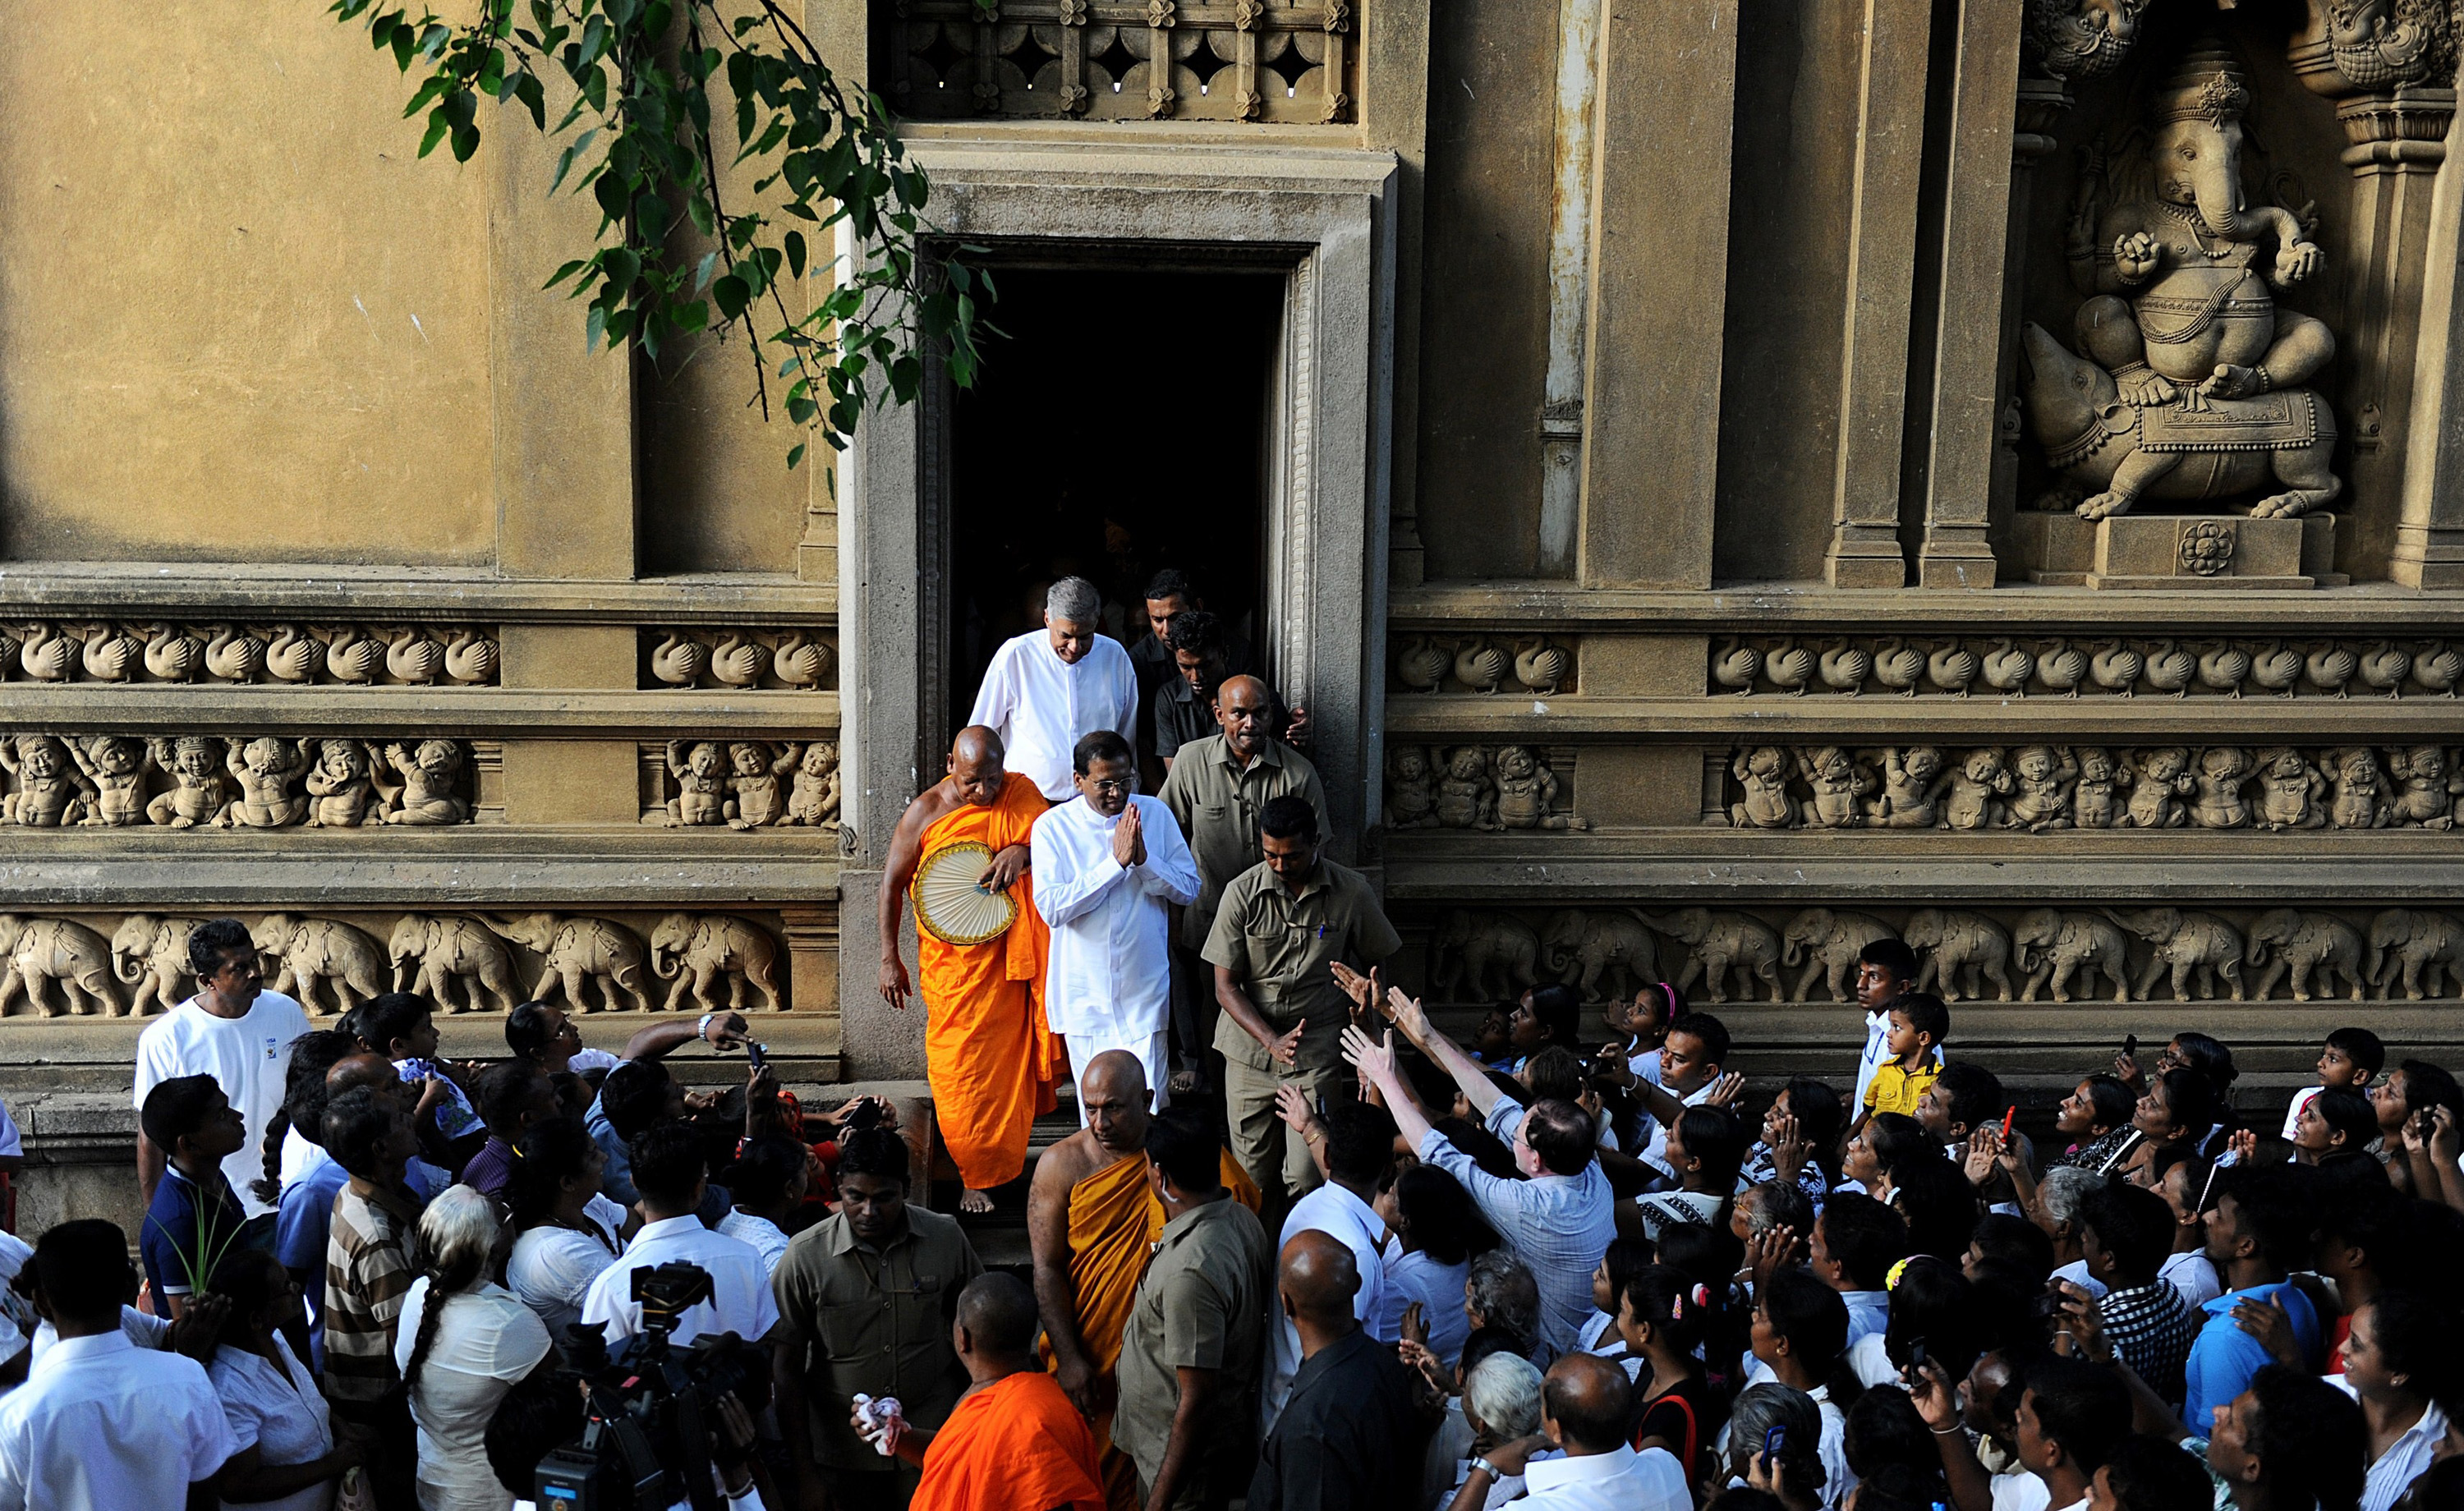 Sirisena, in white with hands together, greets his supporters after praying at a Buddhist temple outside Colombo. (Ishara S. Kodikara—AFP/Getty Images)